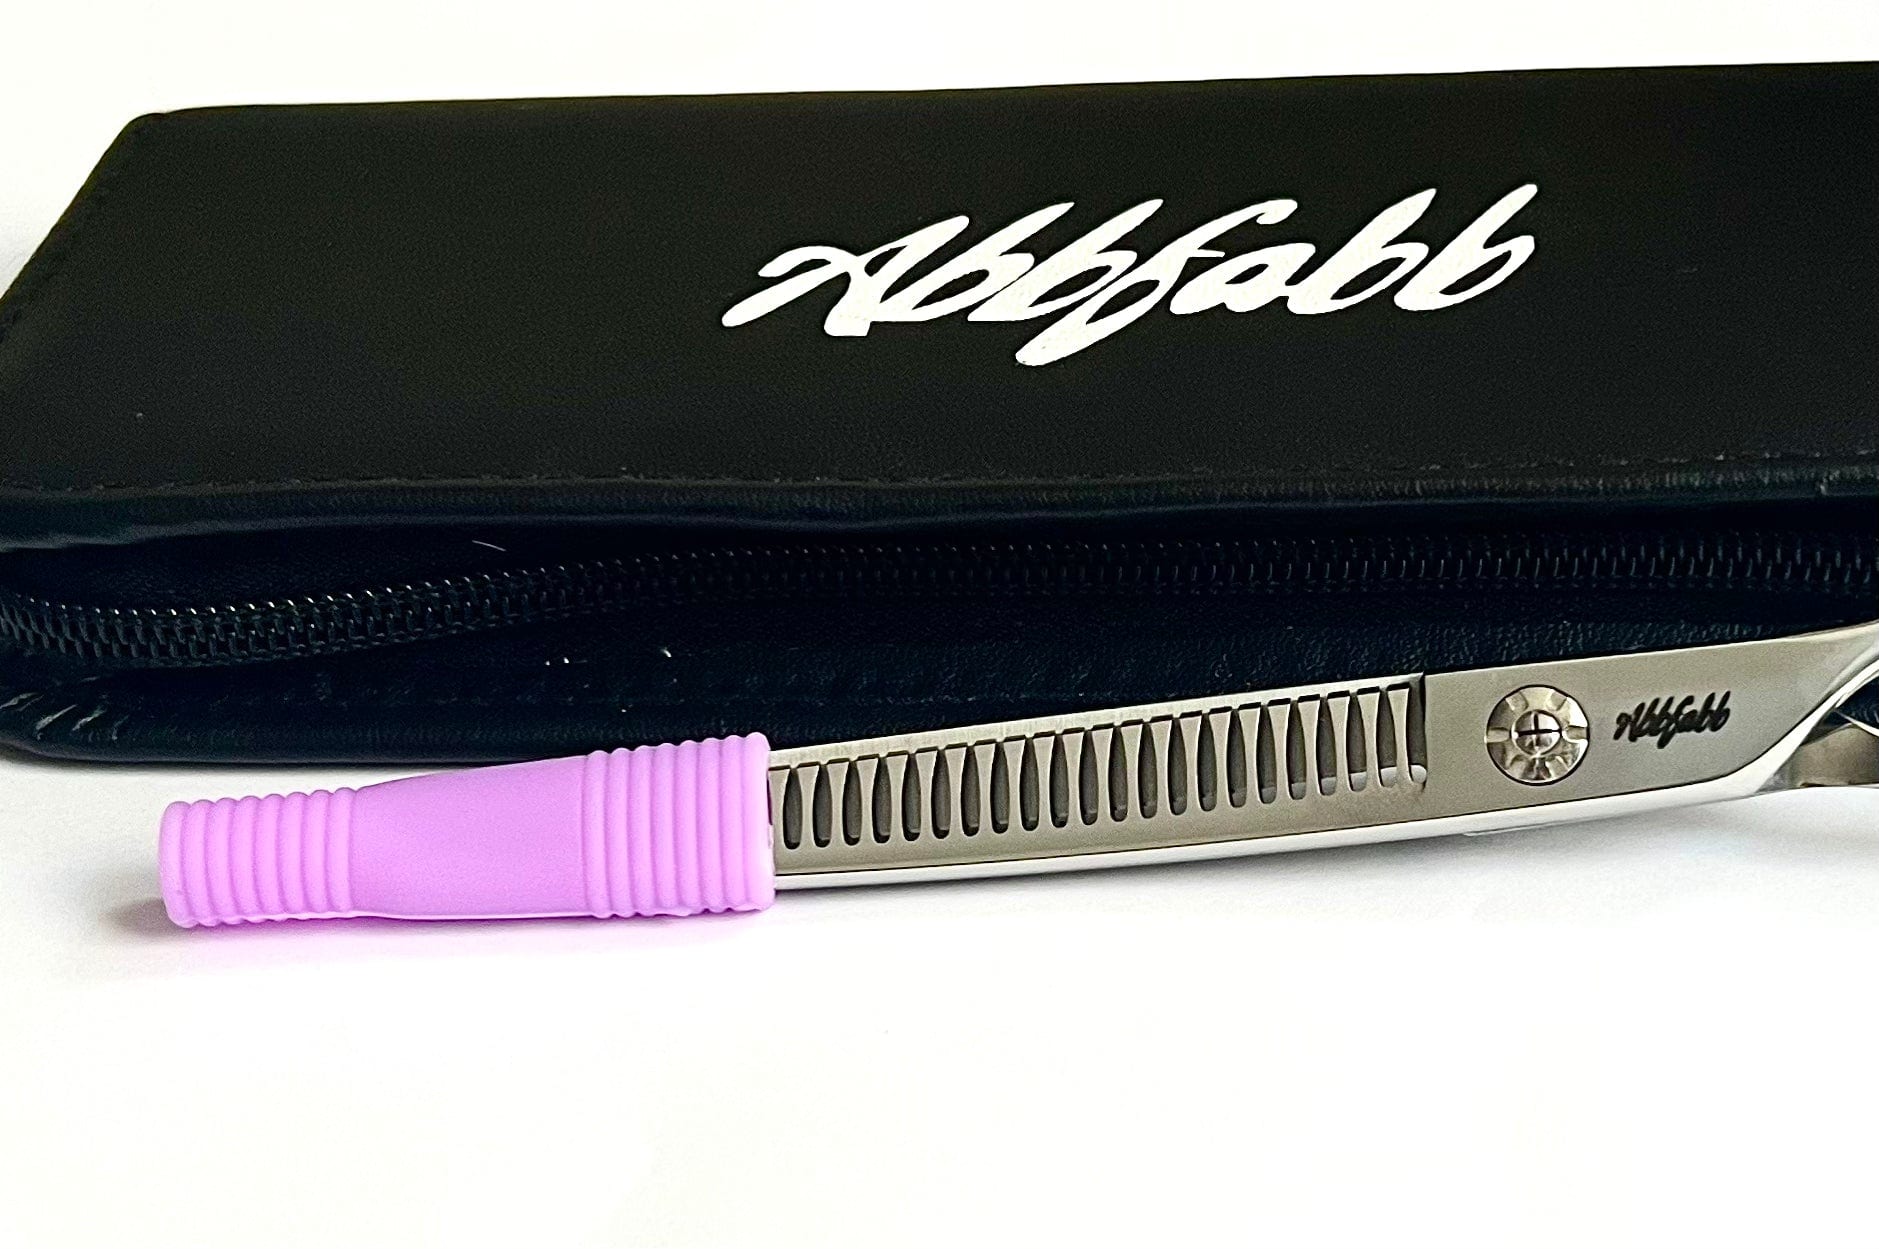 Dog Grooming Scissor Blade and Tip Protector in lilac by Abbfabb Grooming Scissors Ltd